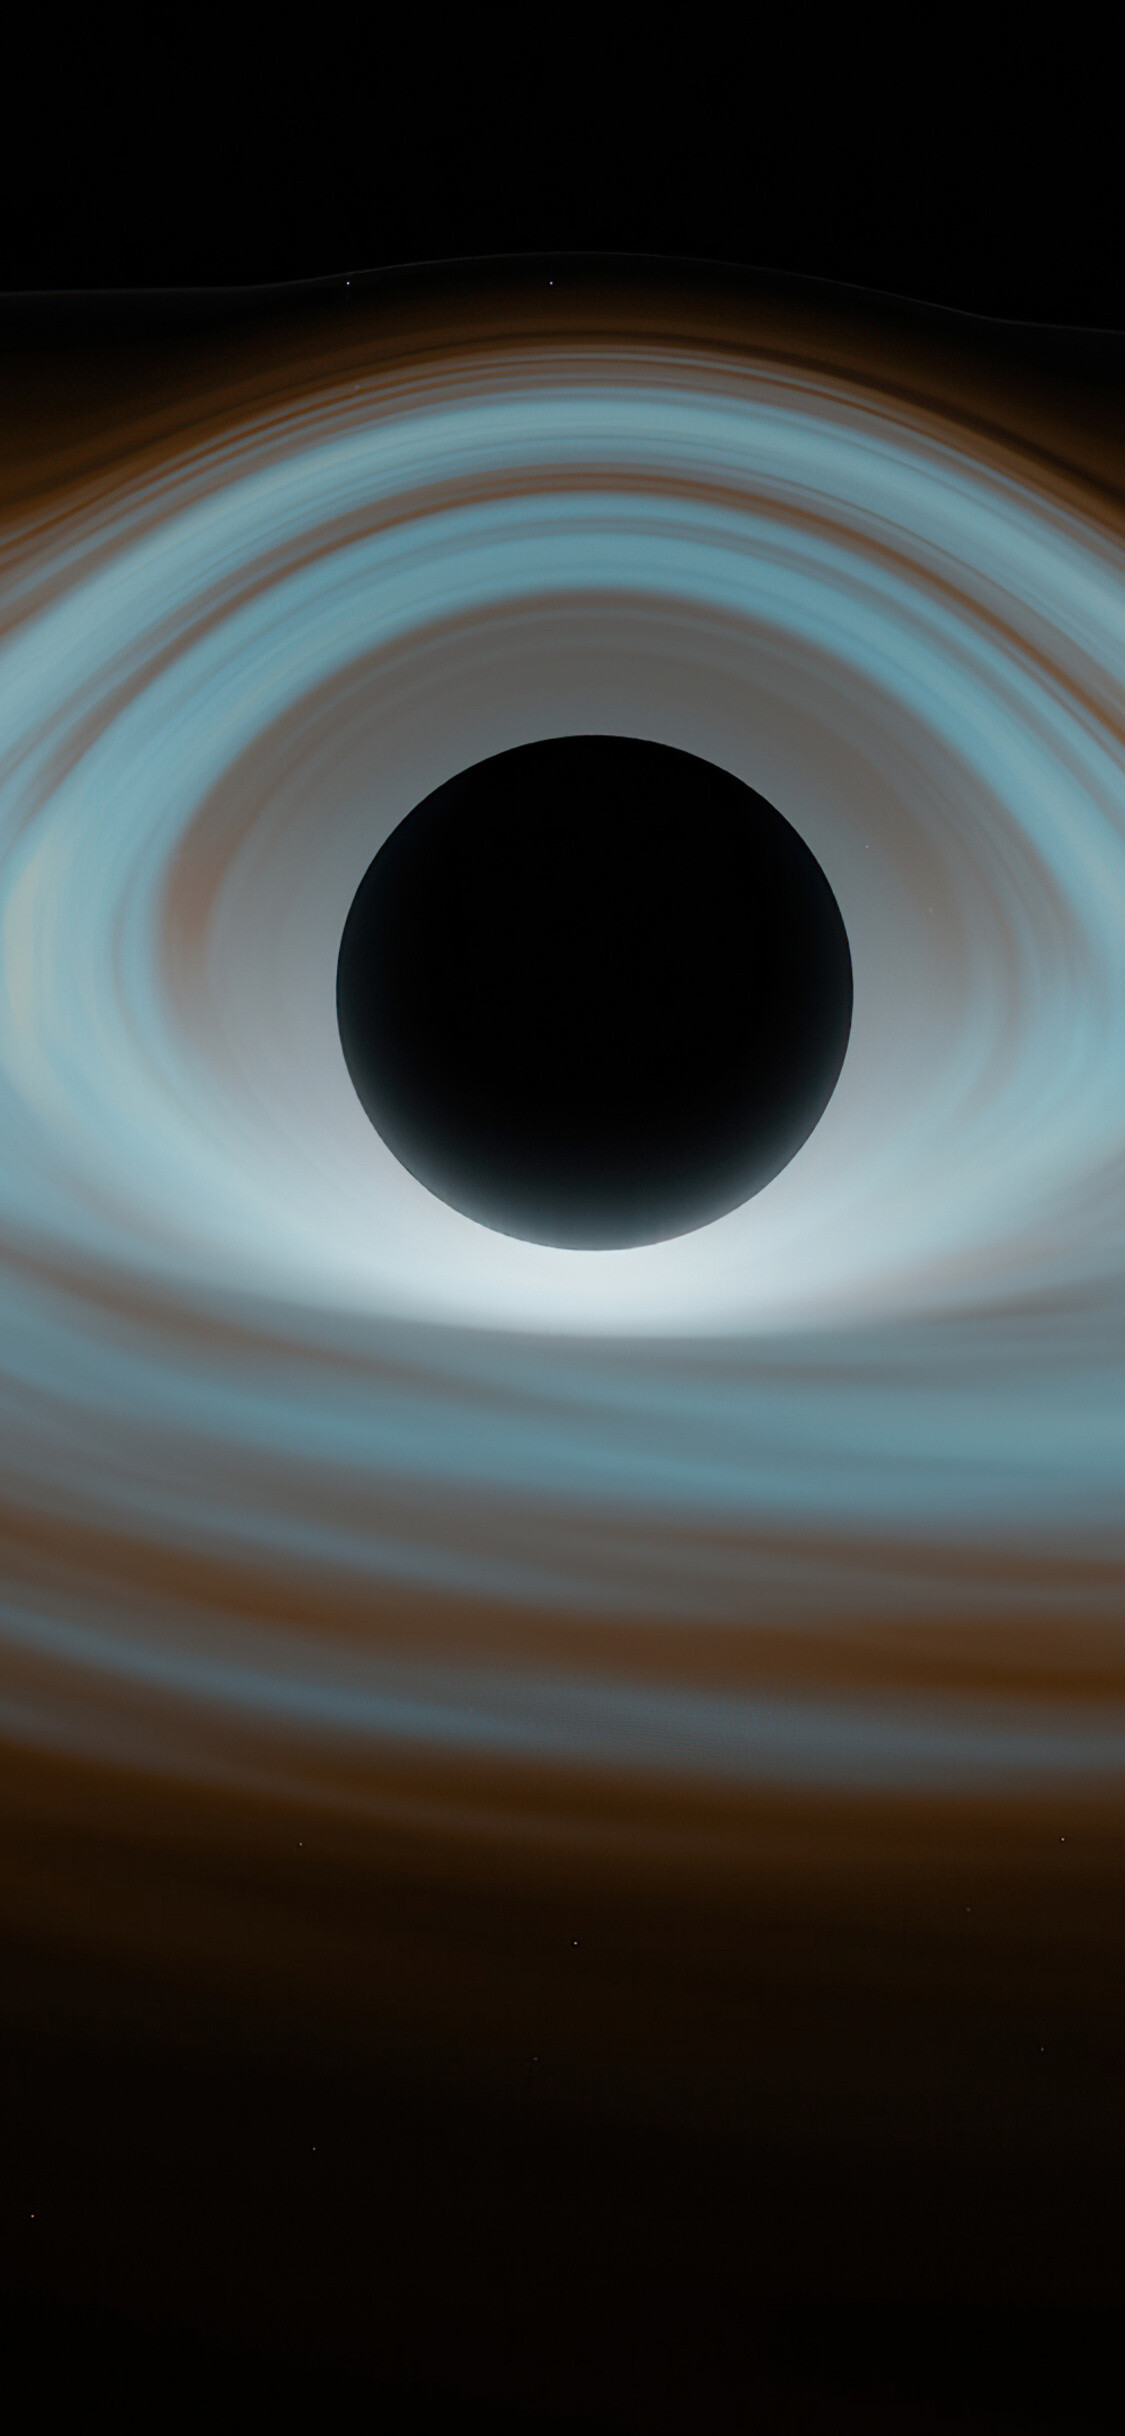 Black Hole: Volumes of space with extreme gravity, Astronomical object. 1130x2440 HD Wallpaper.